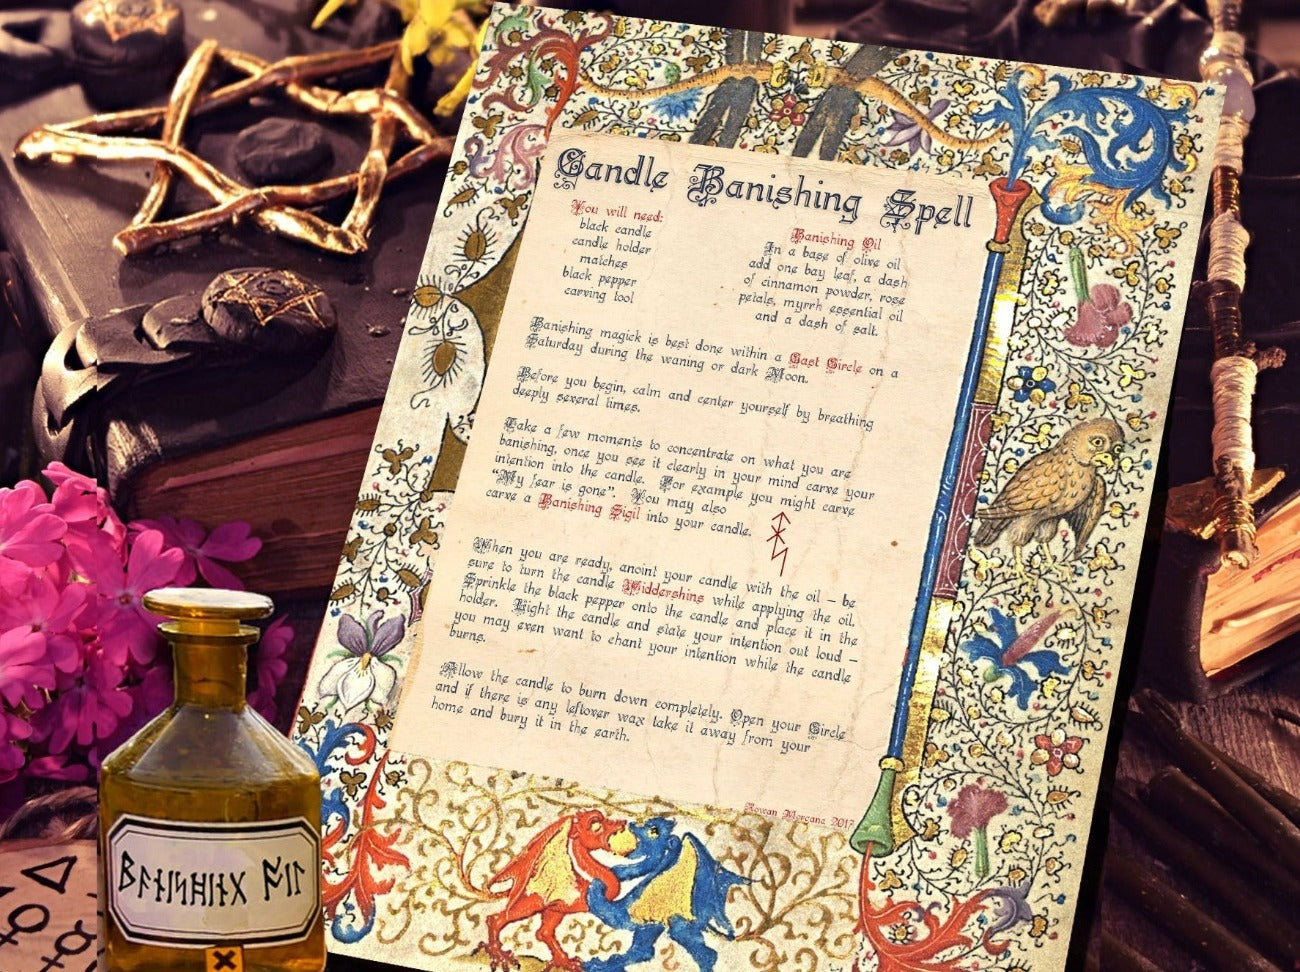 CANDLE BANISHING SPELL, Includes Recipe for Banishing Oil, Candle Magic, Wicca Cleansing Ritual - Morgana Magick Spell